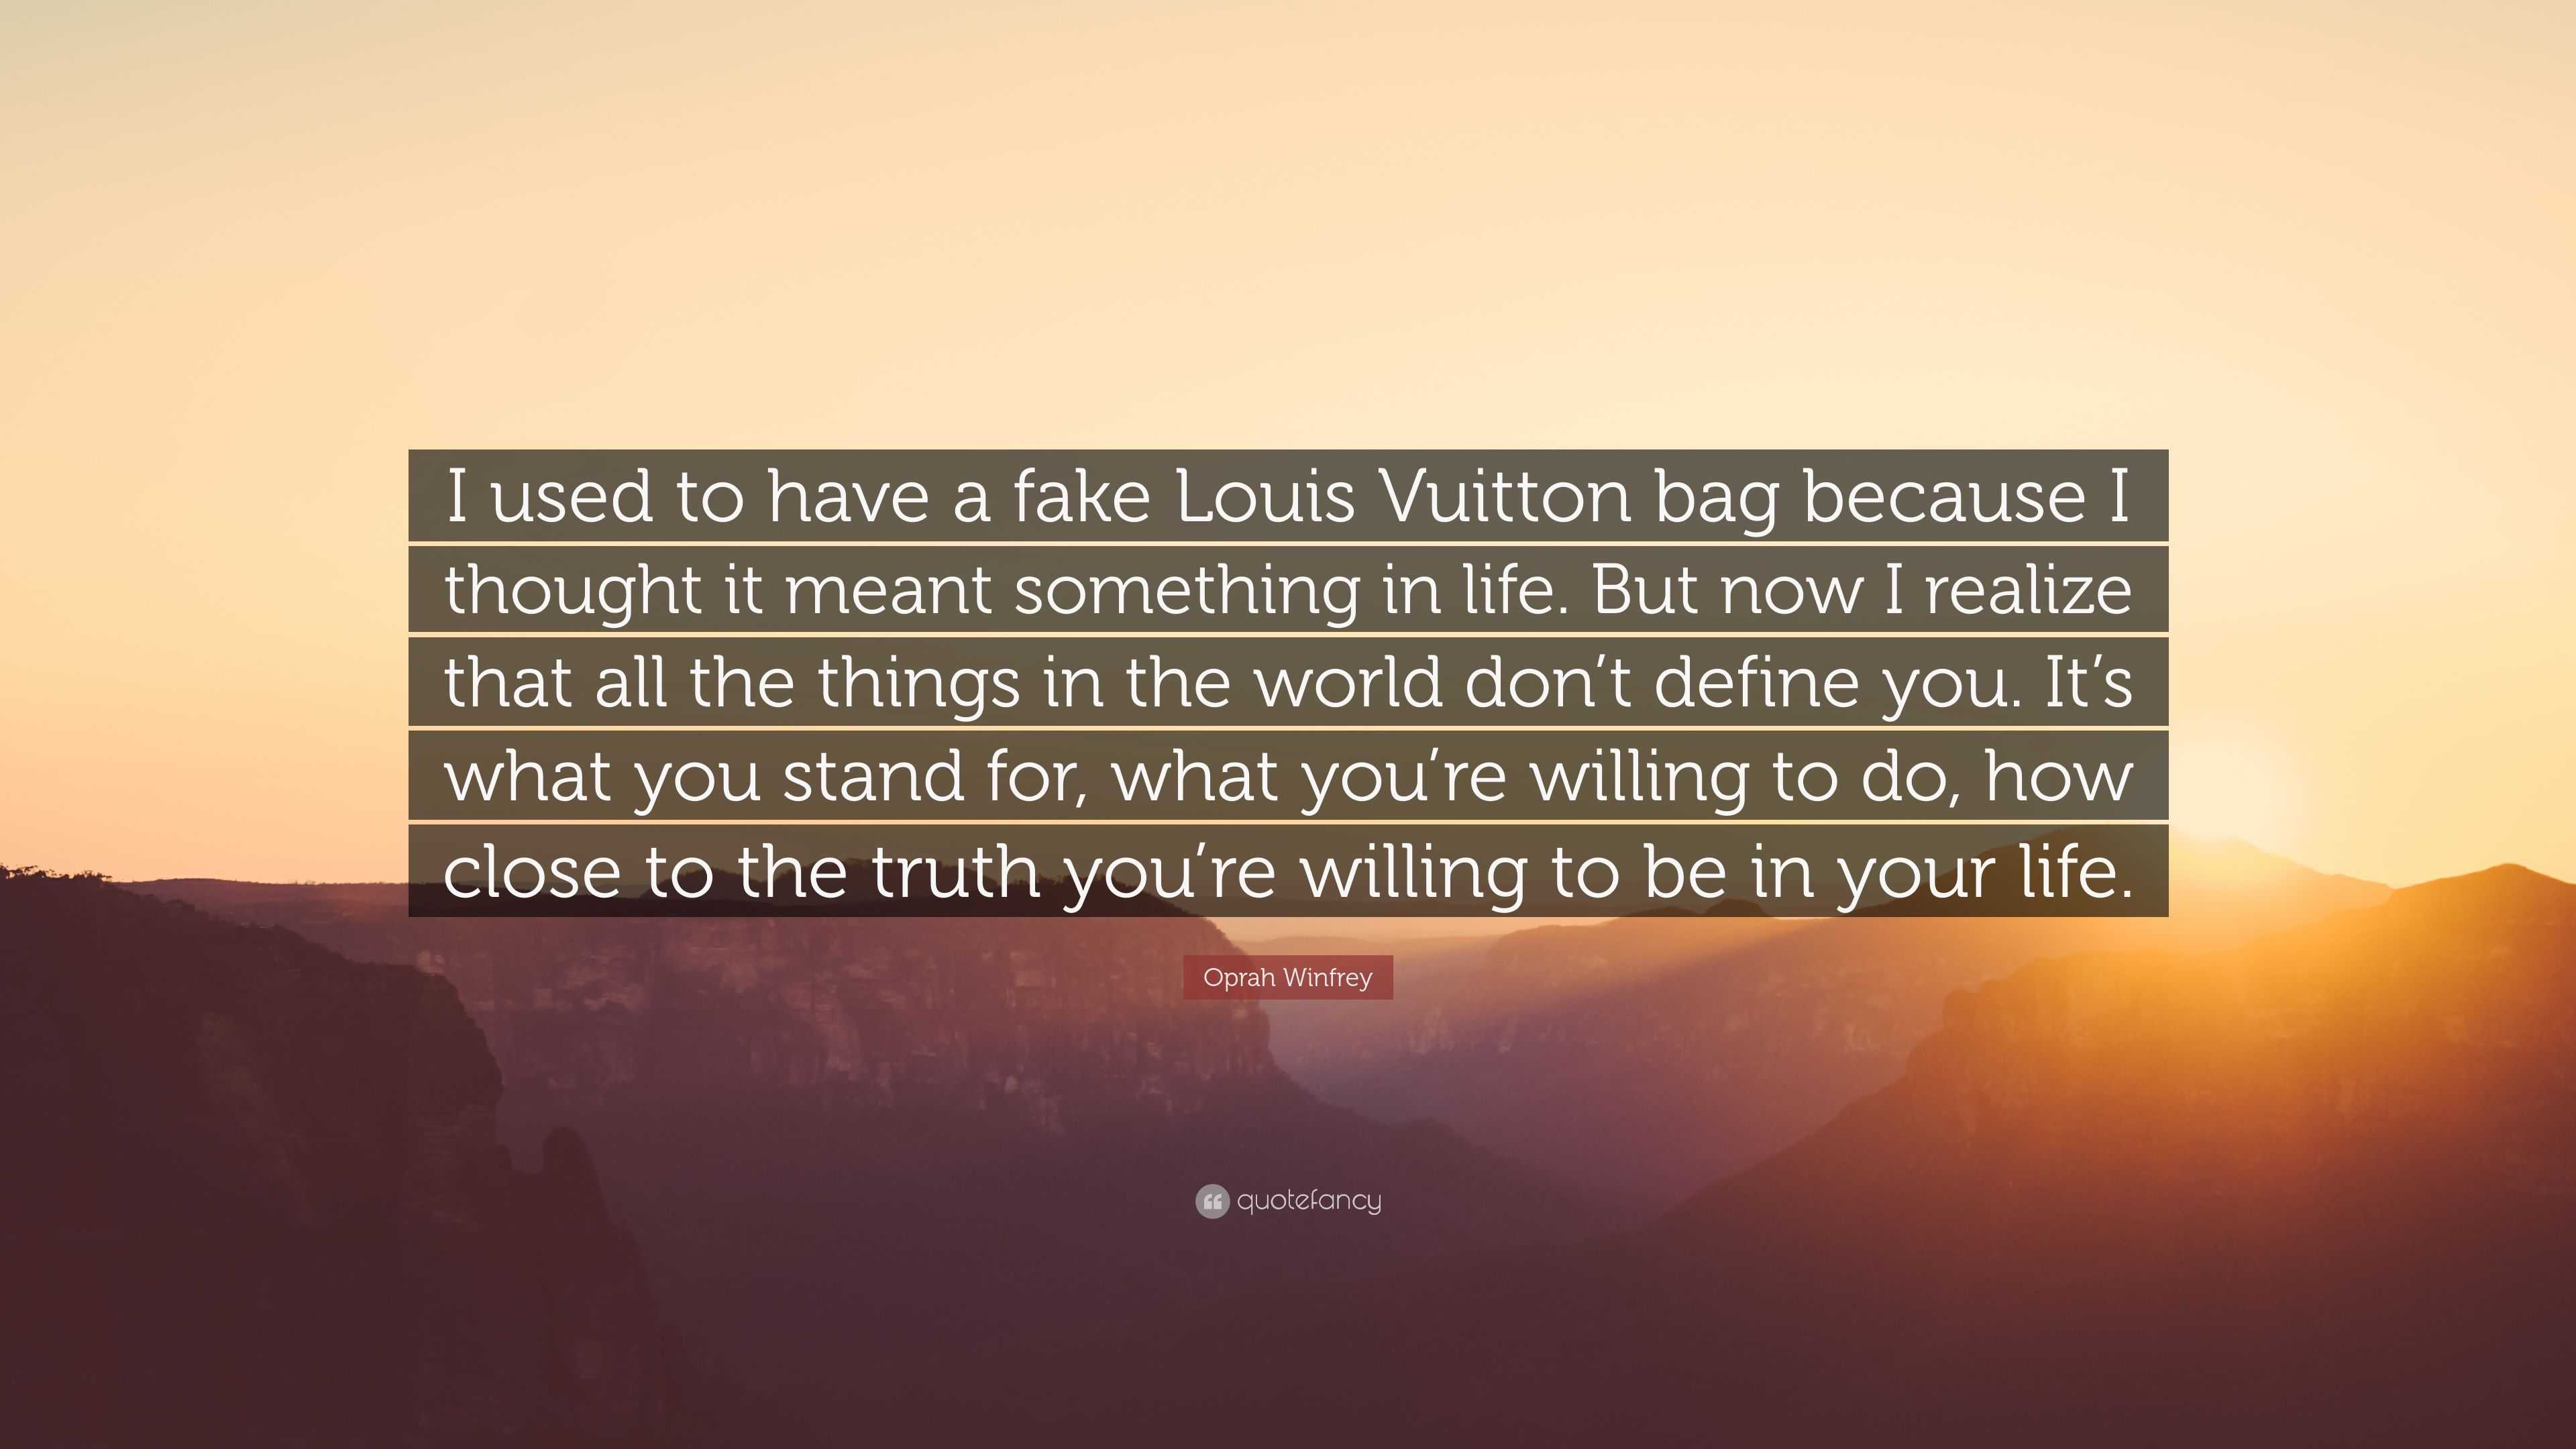 Oprah Winfrey Quote: “I used to have a fake Louis Vuitton bag because I thought it meant ...